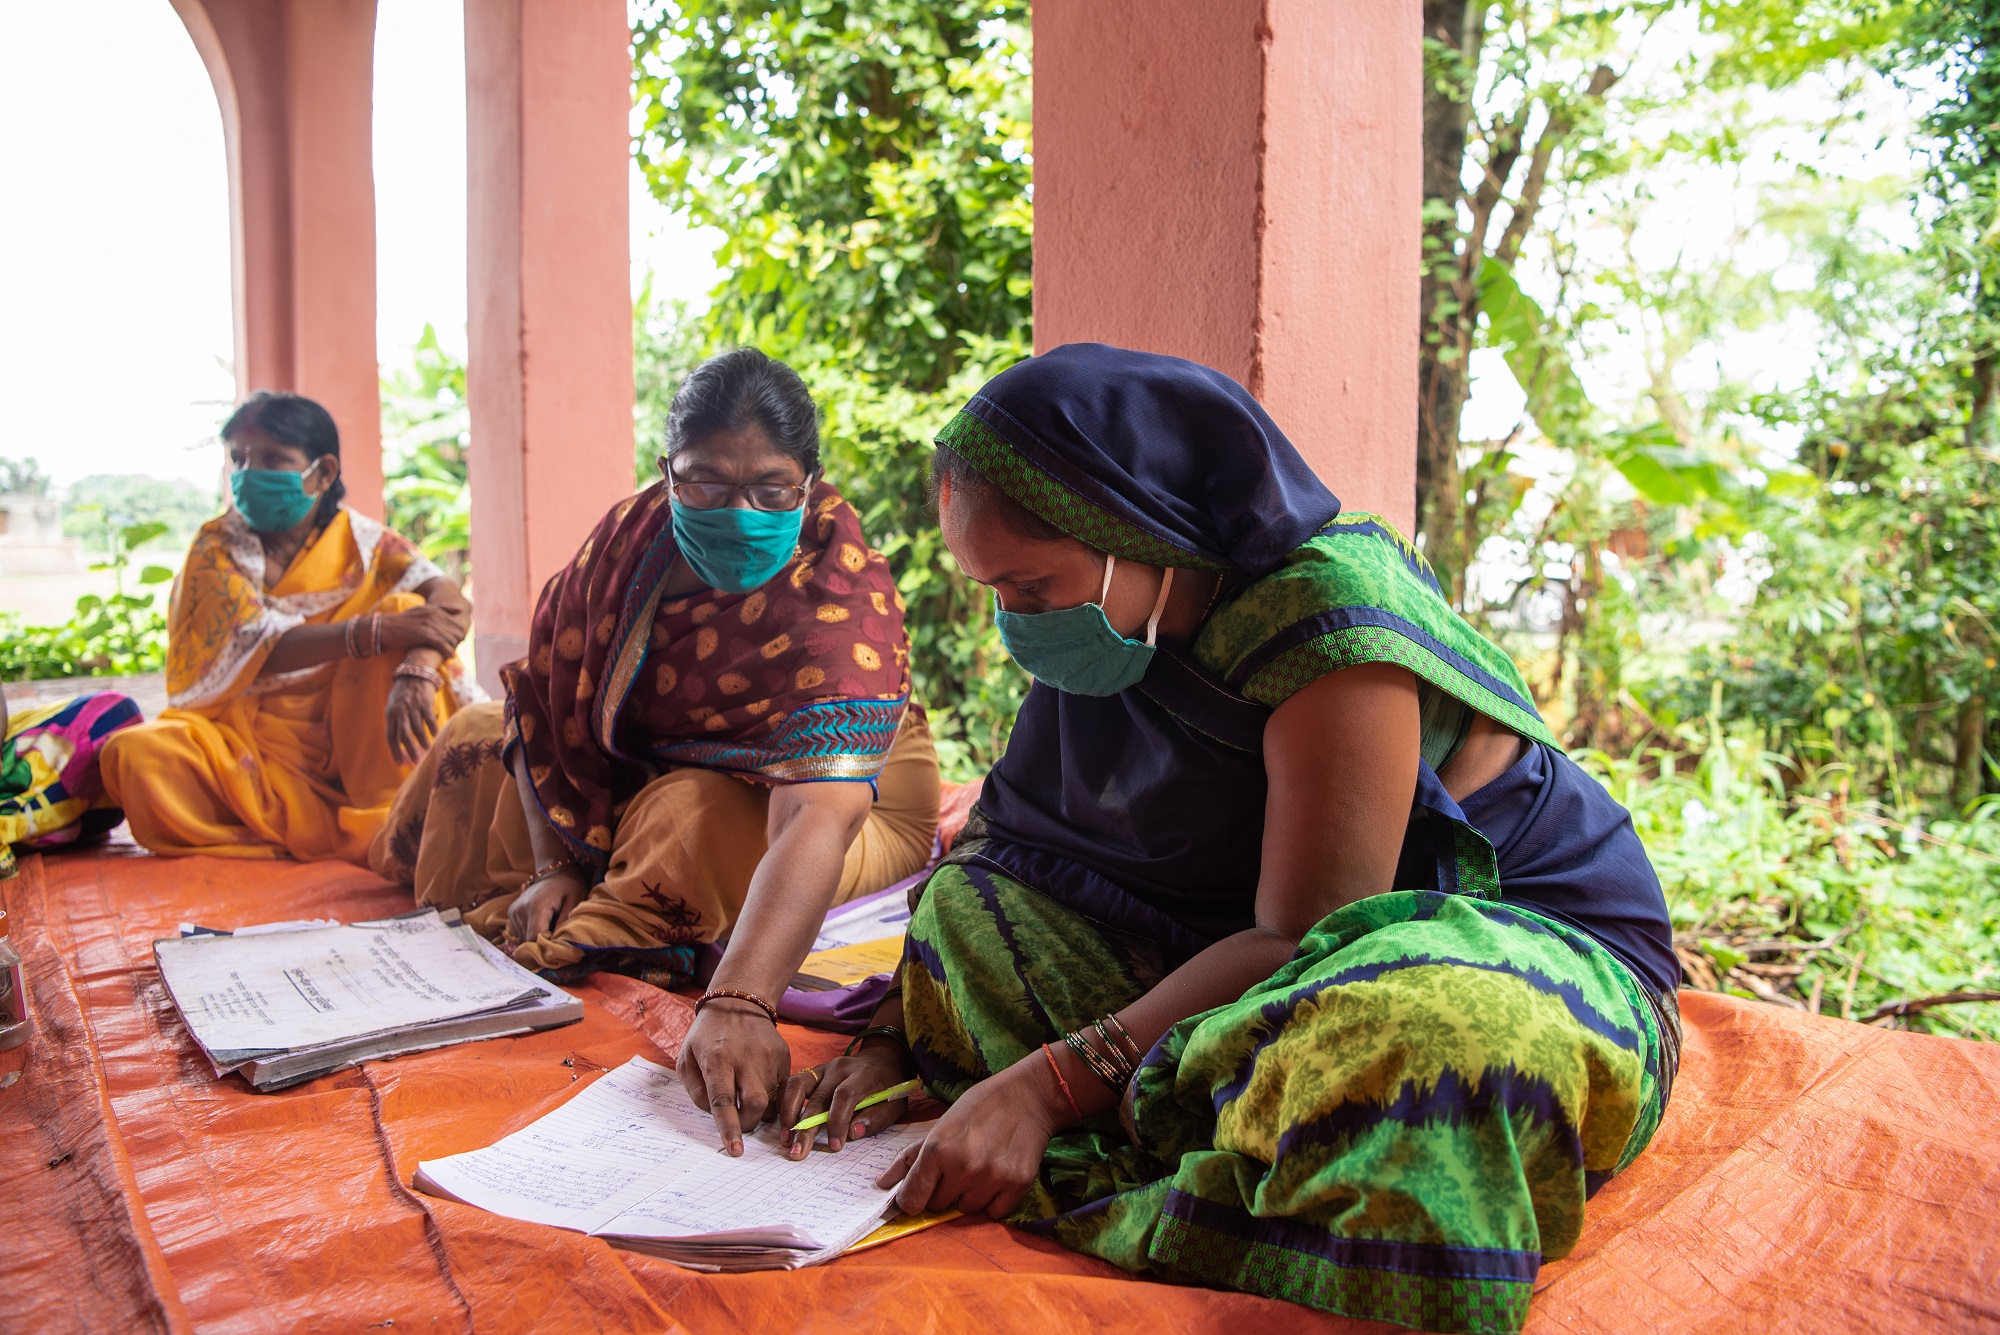 Women’s self-help groups in India build economic resources and support communities—and have continued to support women throughout the pandemic.